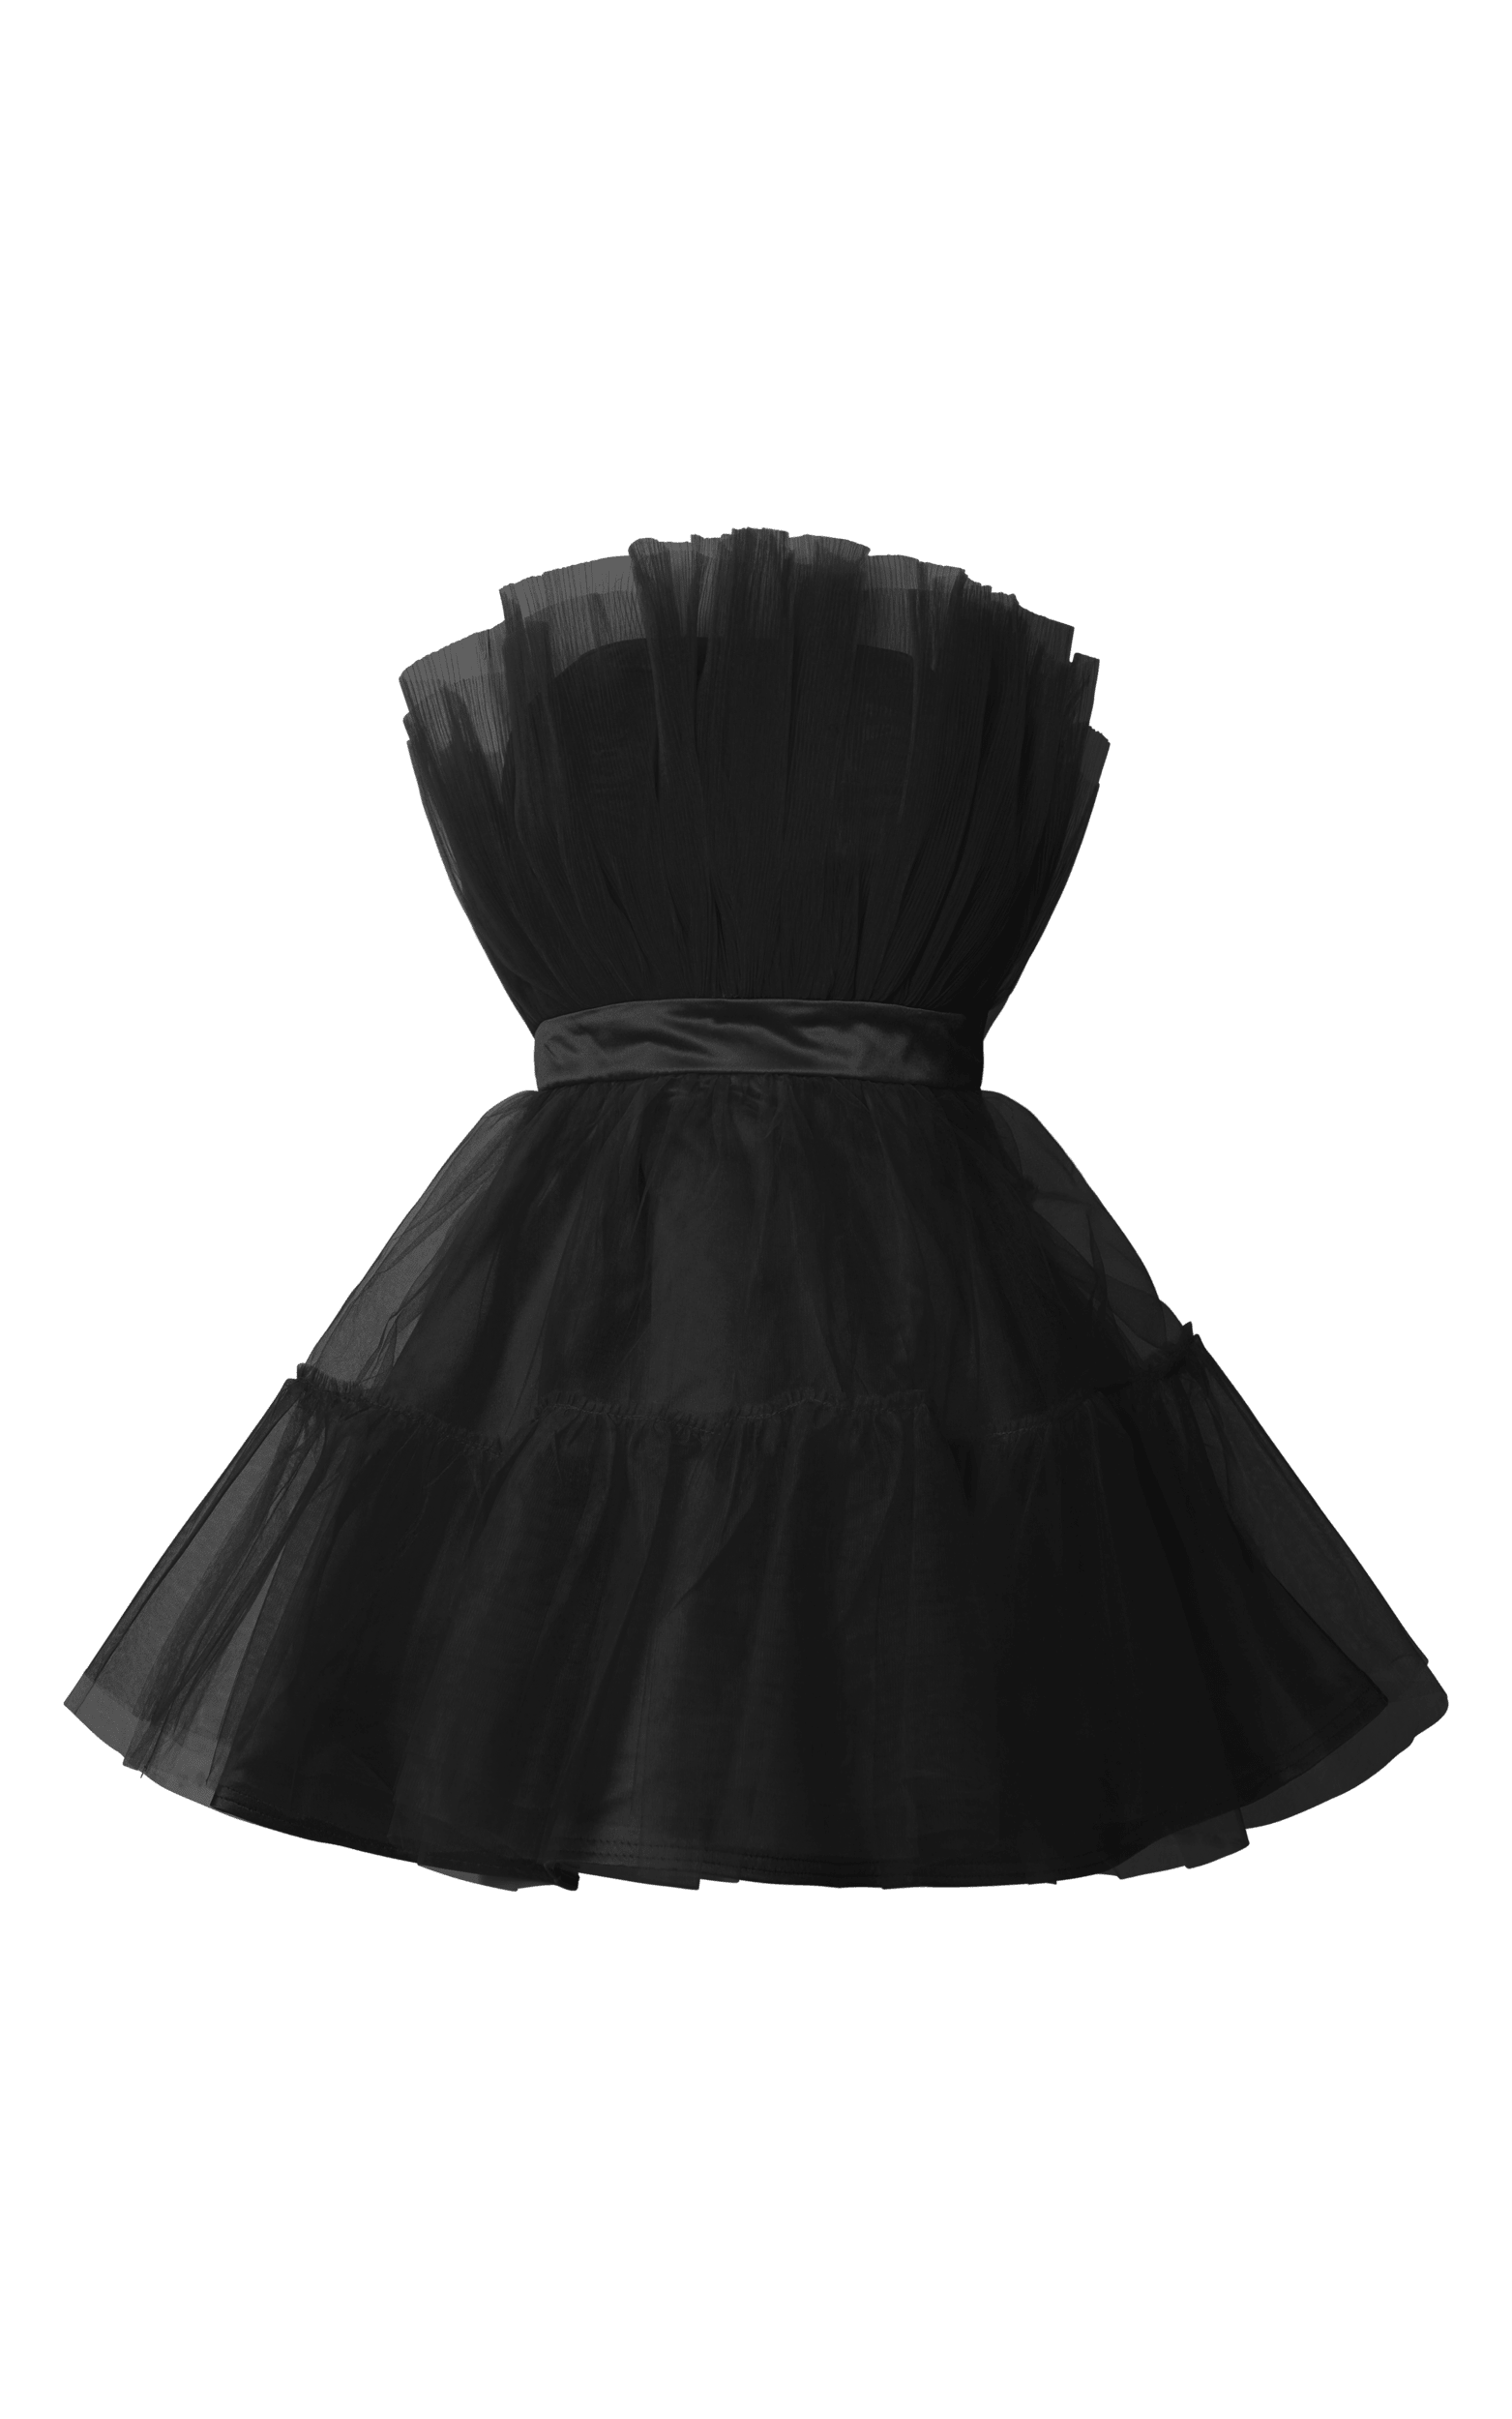 Amalya Mini Dress - Tiered Tulle Fit and Flare Dress in Black | Showpo